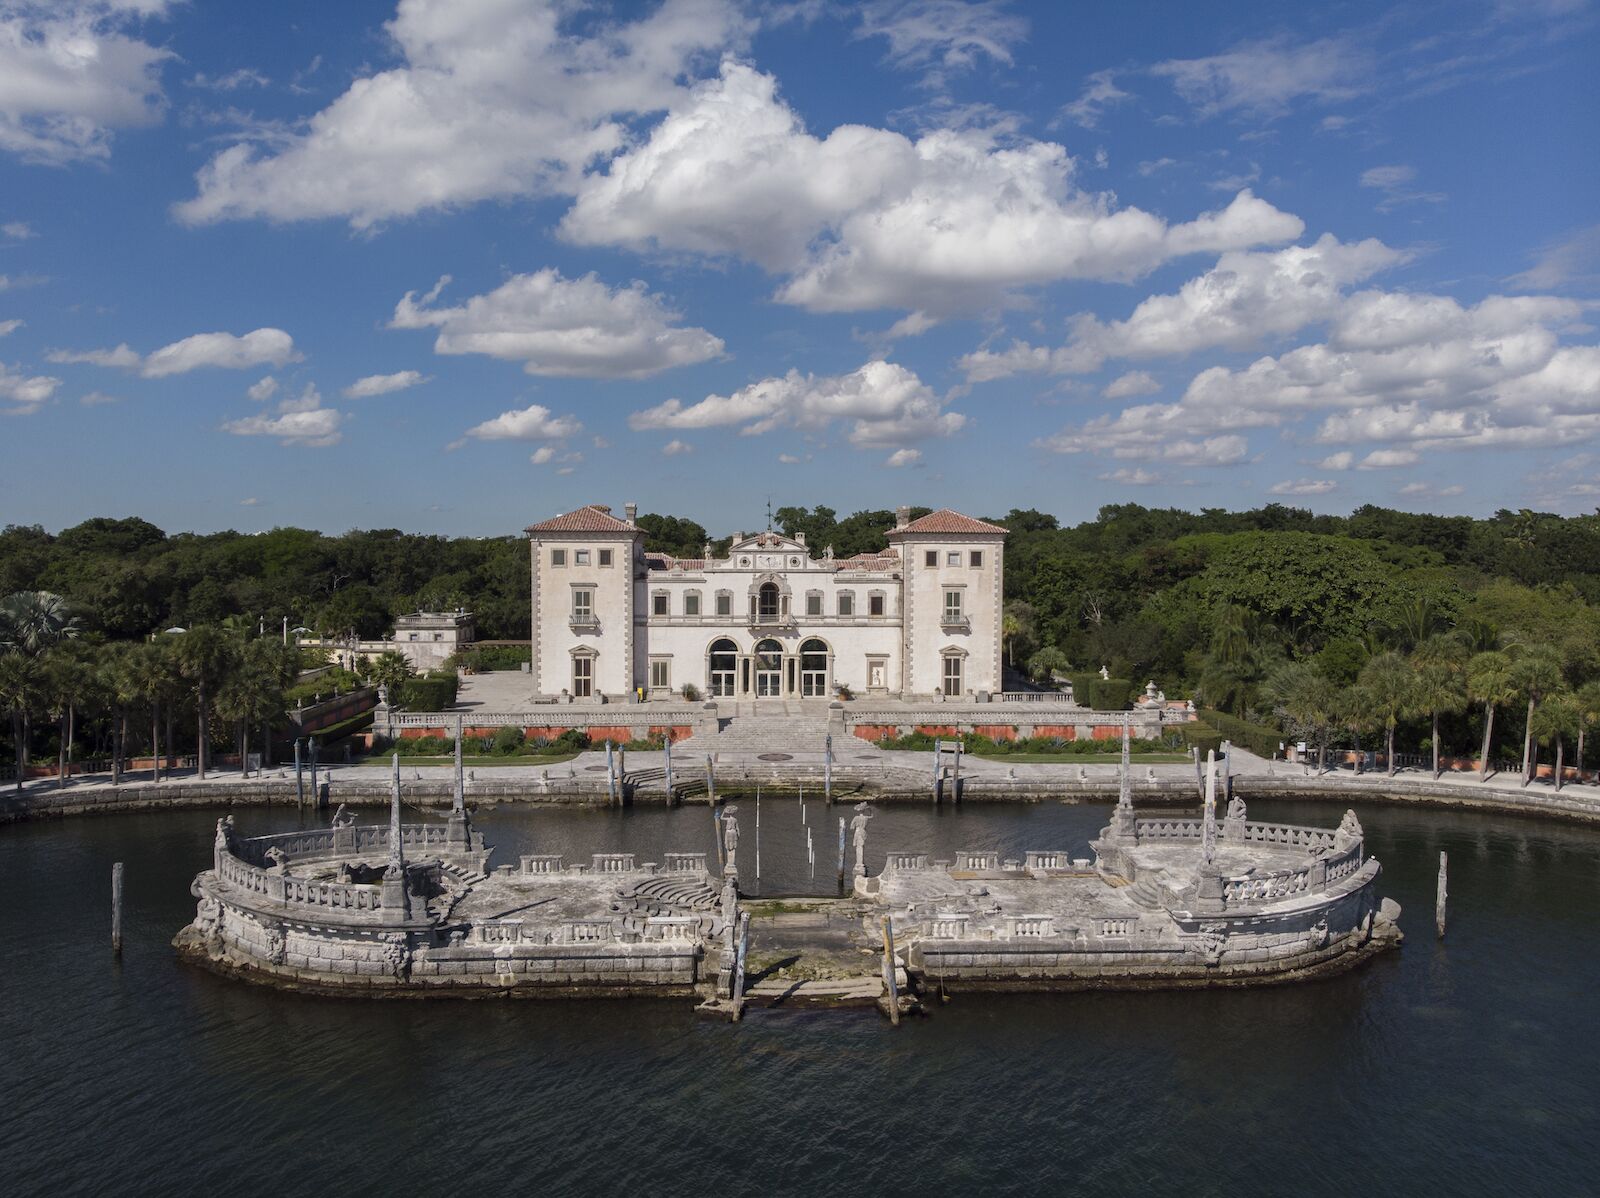 The Miami Vizcaya Museum and Gardens and the famous barge as seen from above.